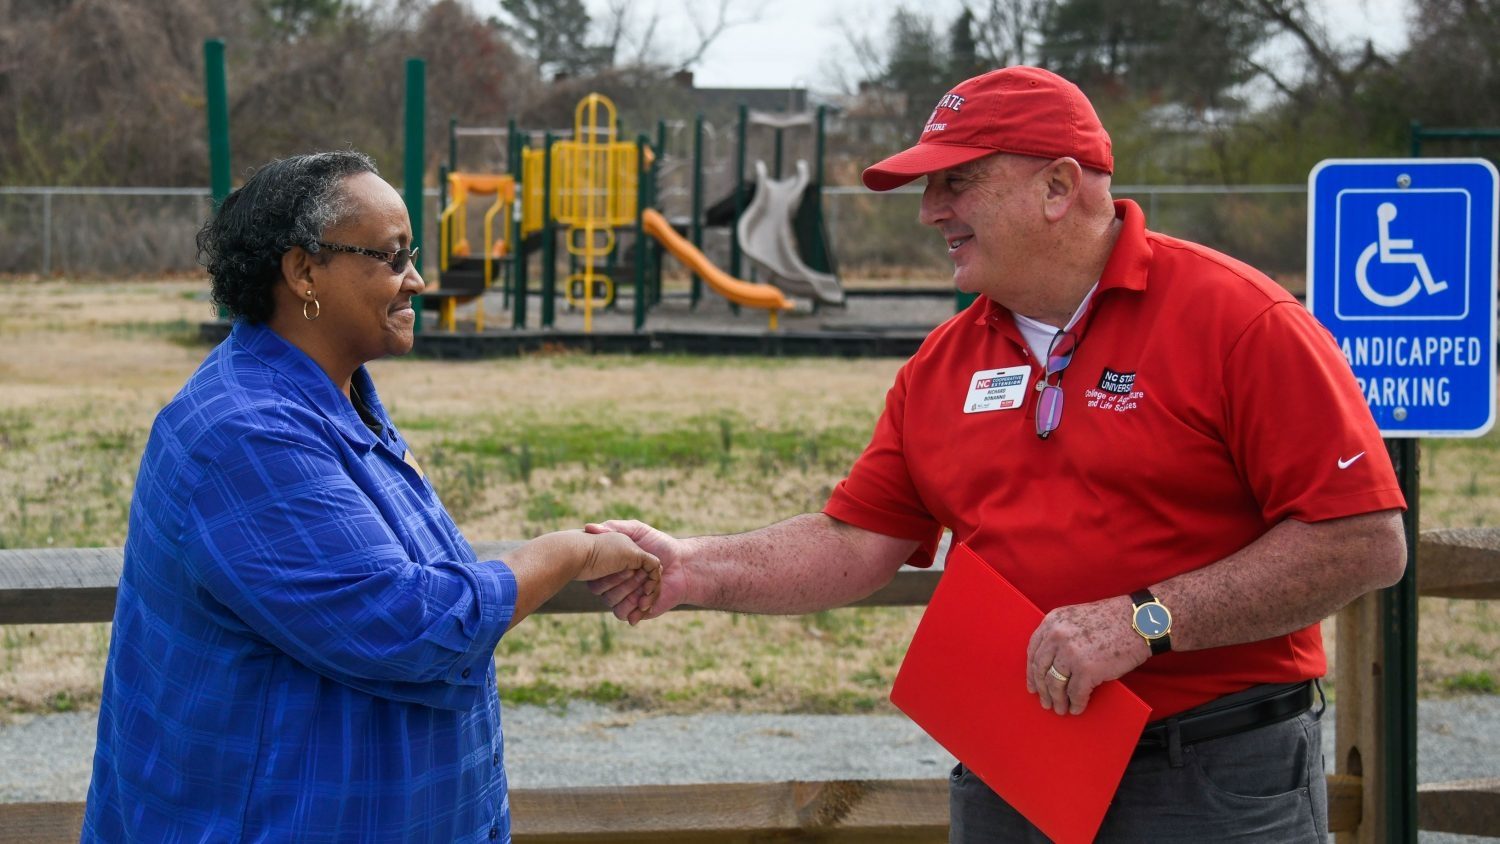 Two people shake hands. Playground equipment behind them.